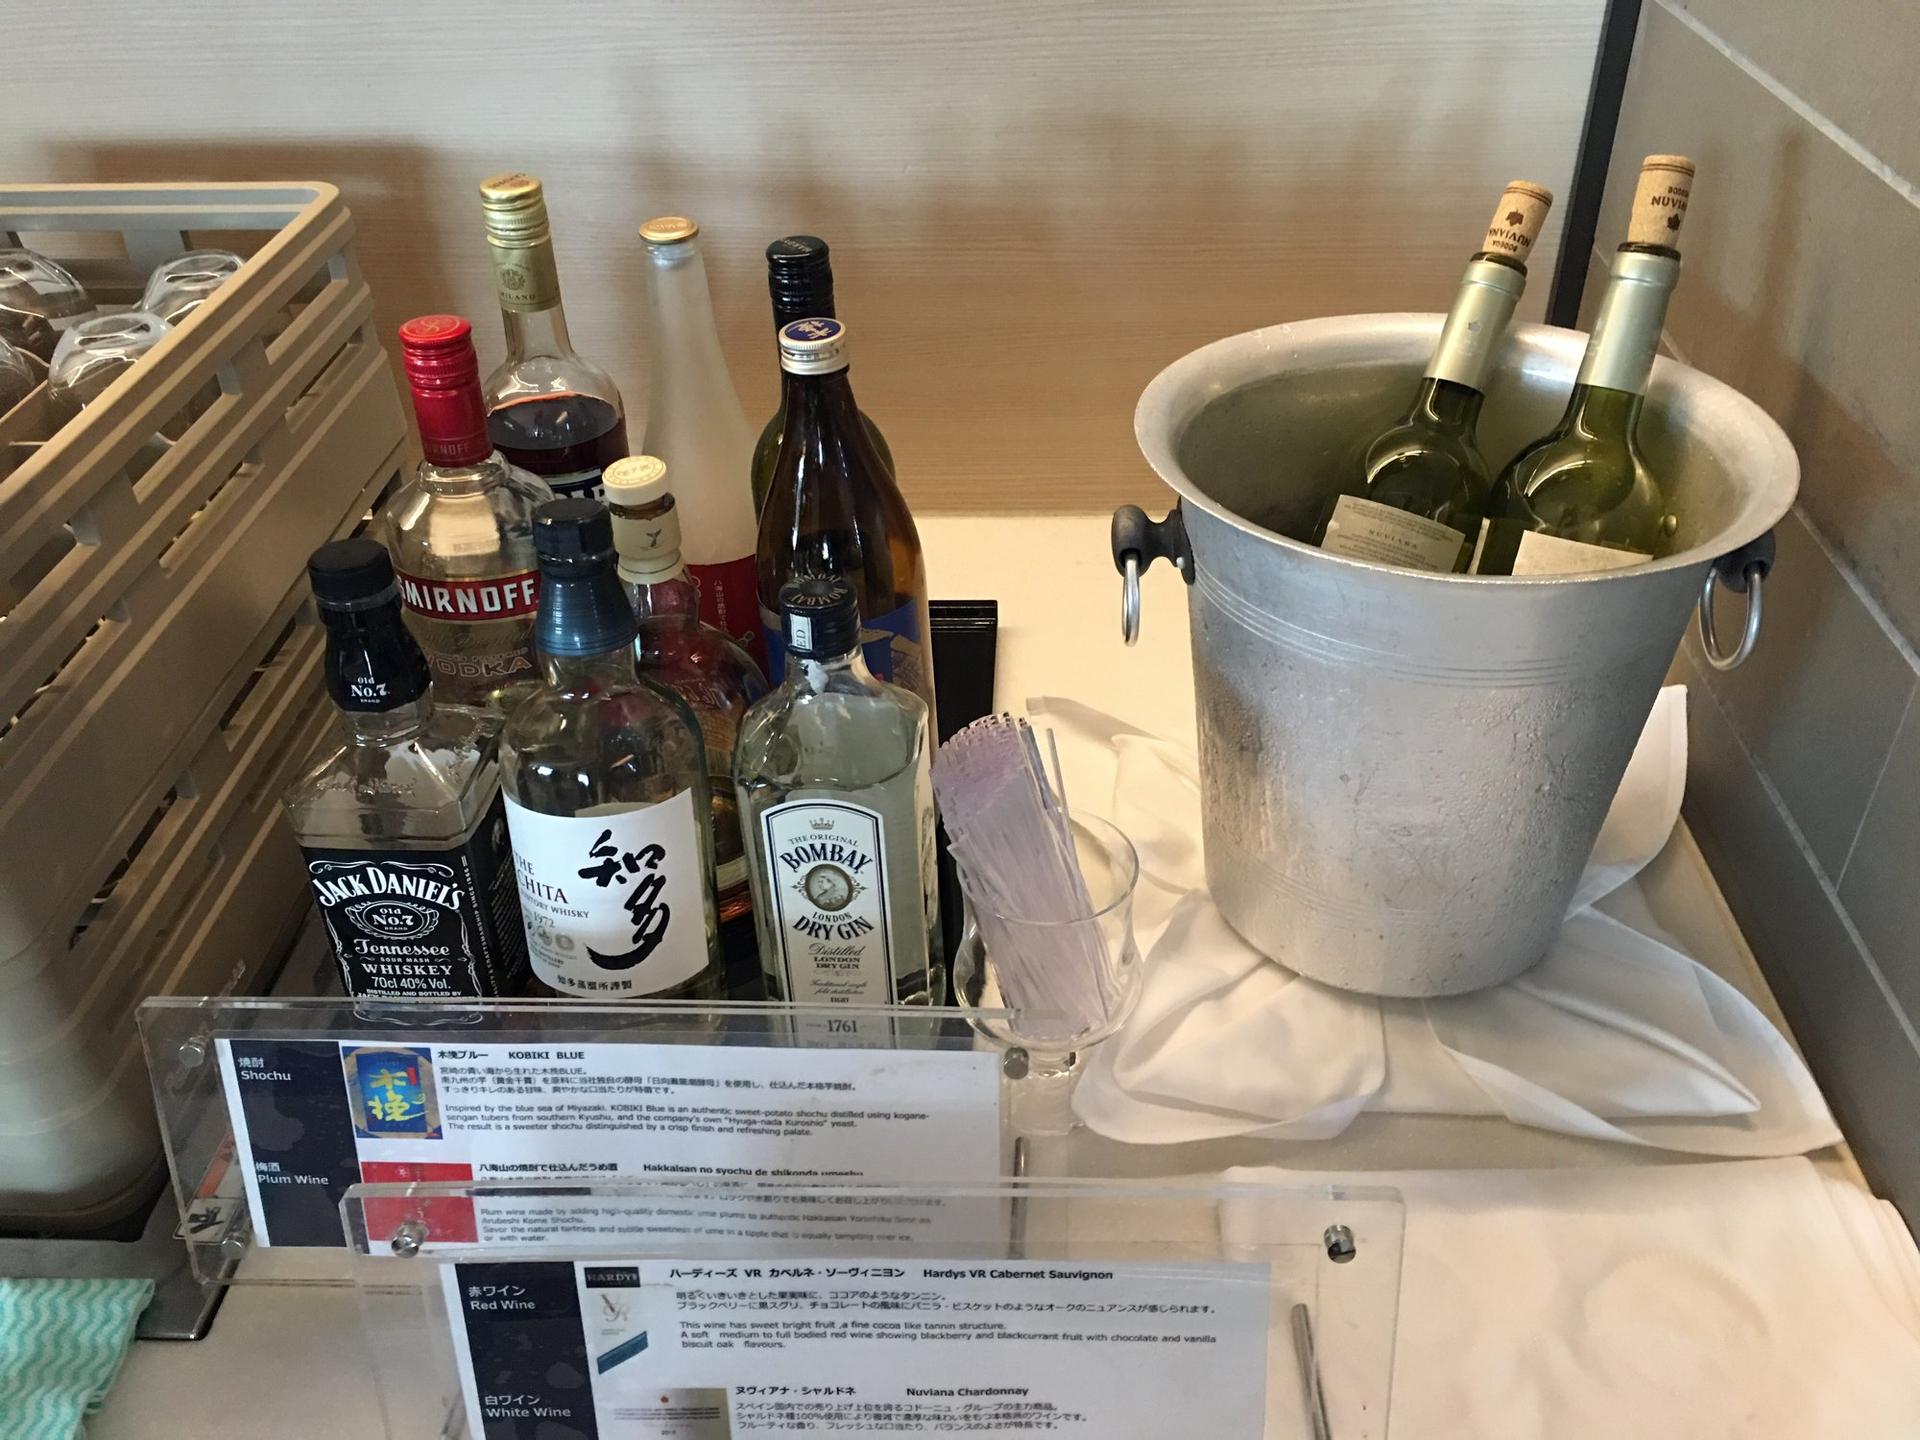 All Nippon Airways ANA Lounge (Gate 110) image 18 of 41